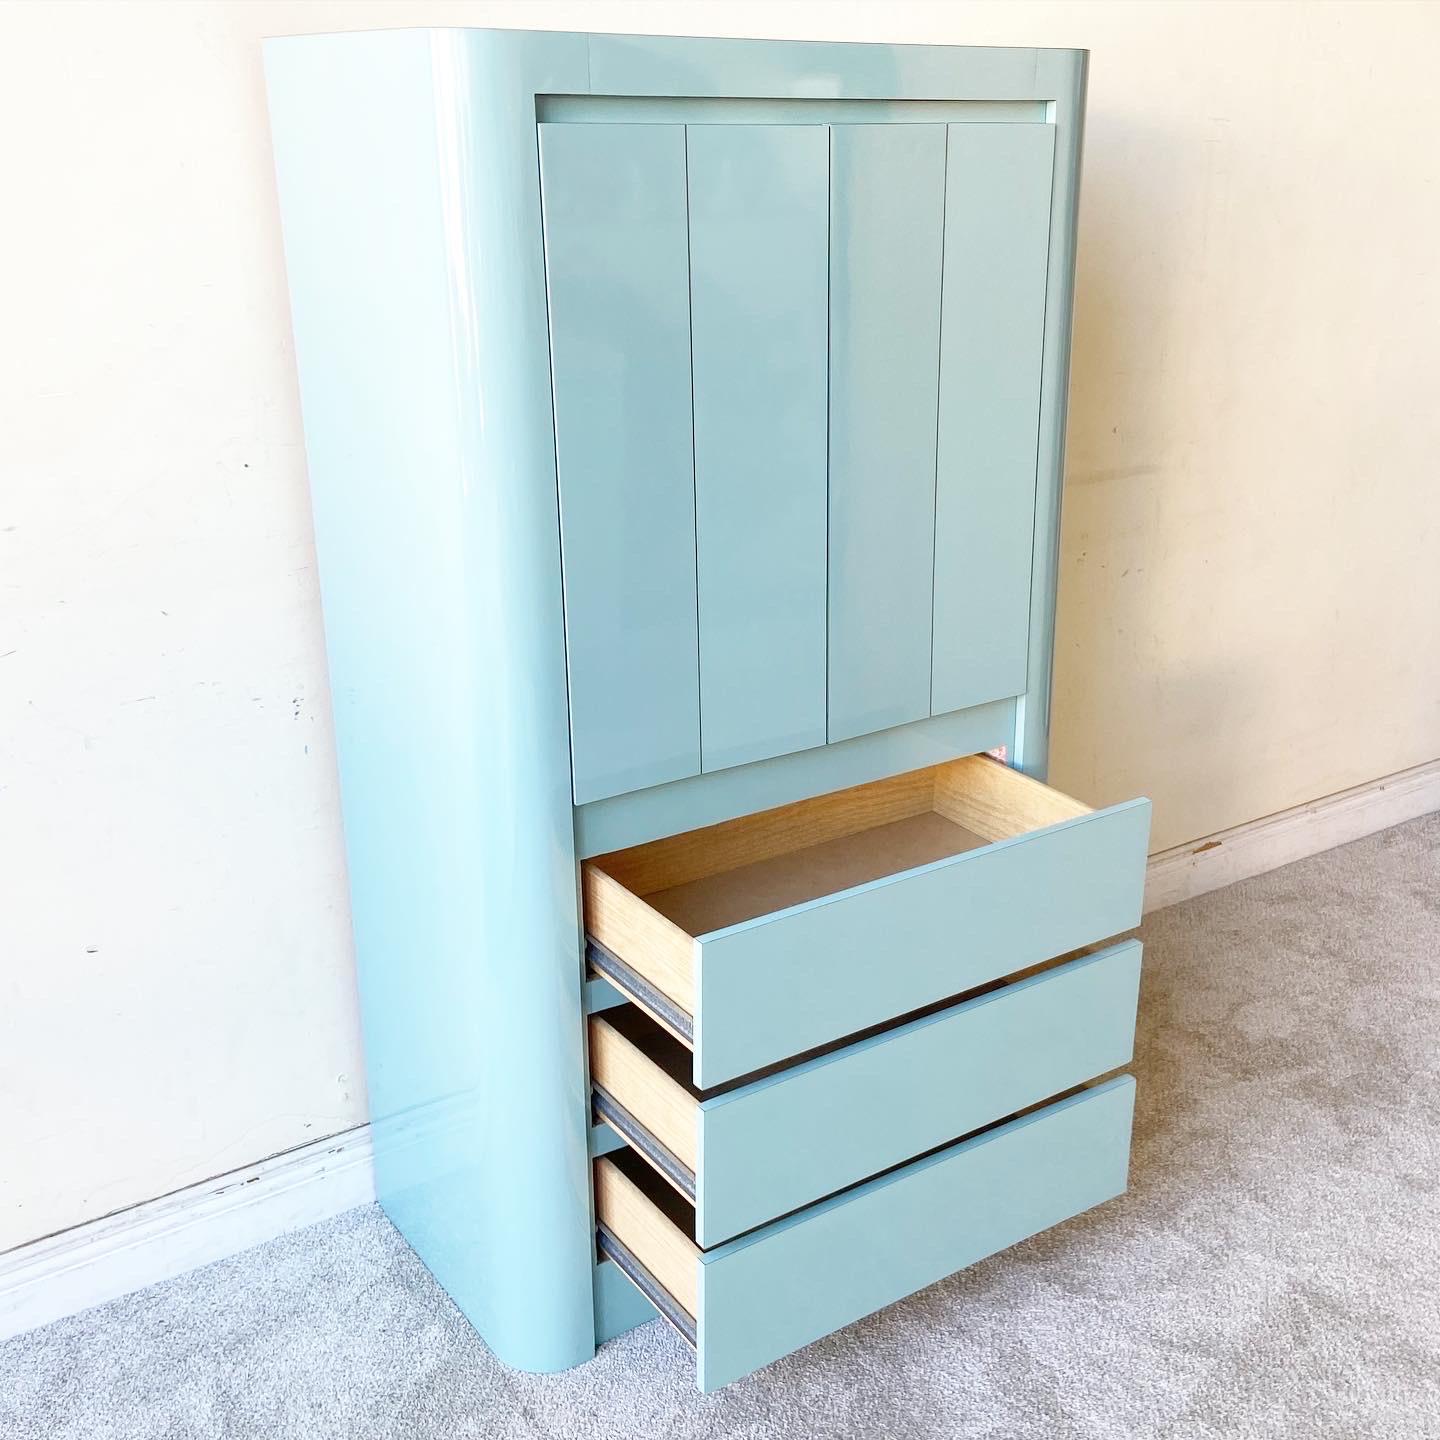 Amazing vintage 1980s postmodern armoire. Features an aqua blue lacquer laminate with a large shelves storage space and 3 spacious drawers.